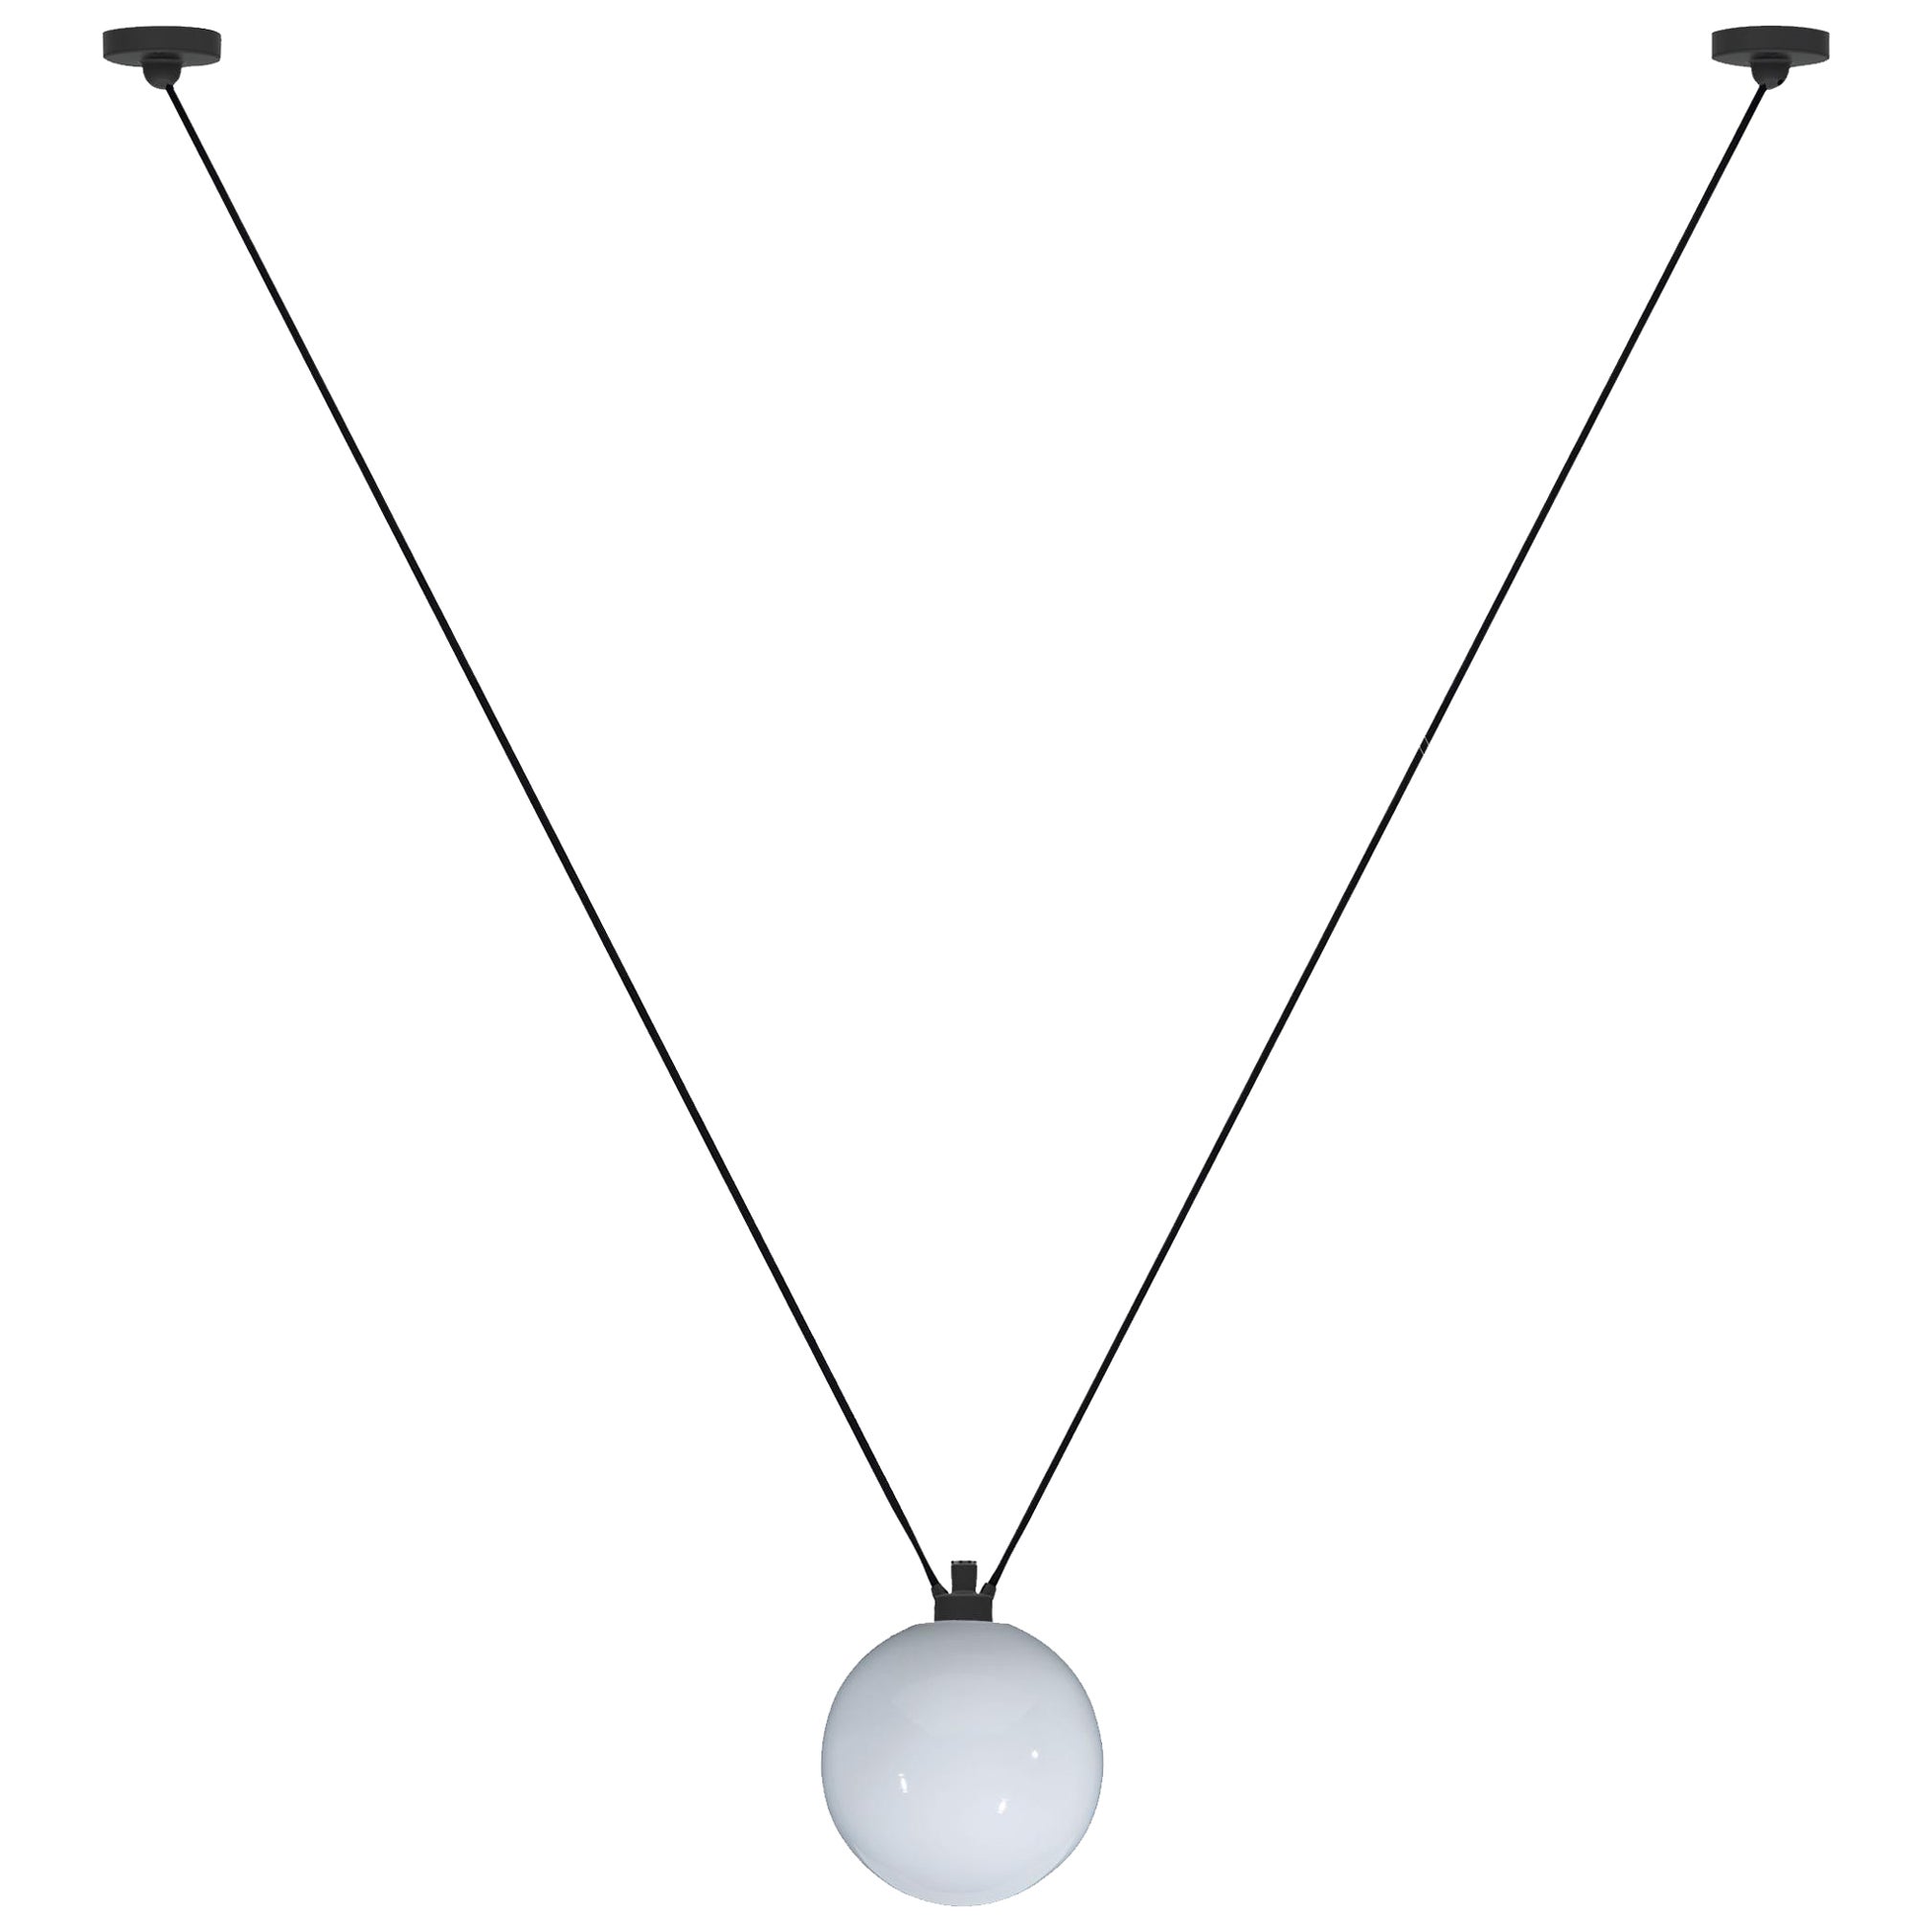 DCW Editions Les Acrobates N°323 Pendant Lamp in Black Arm and Large Glassball